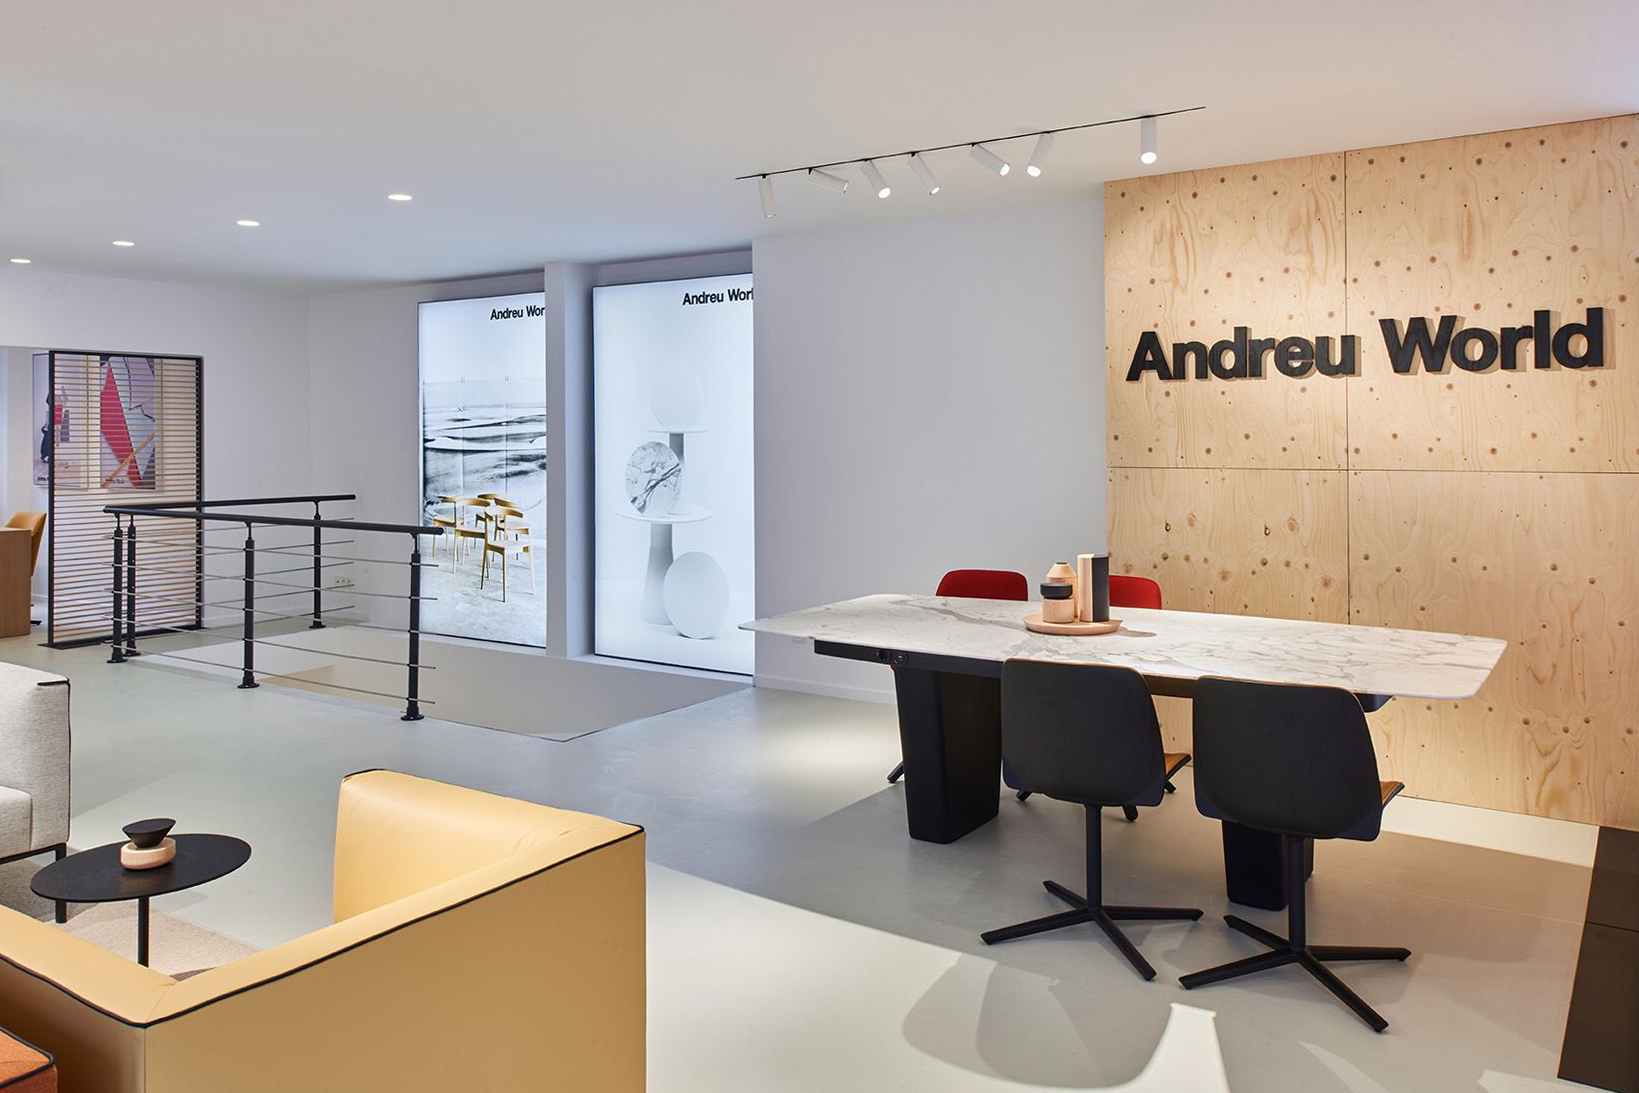 Andreu World´s showroom in Paris (France). Photo by Andreu World